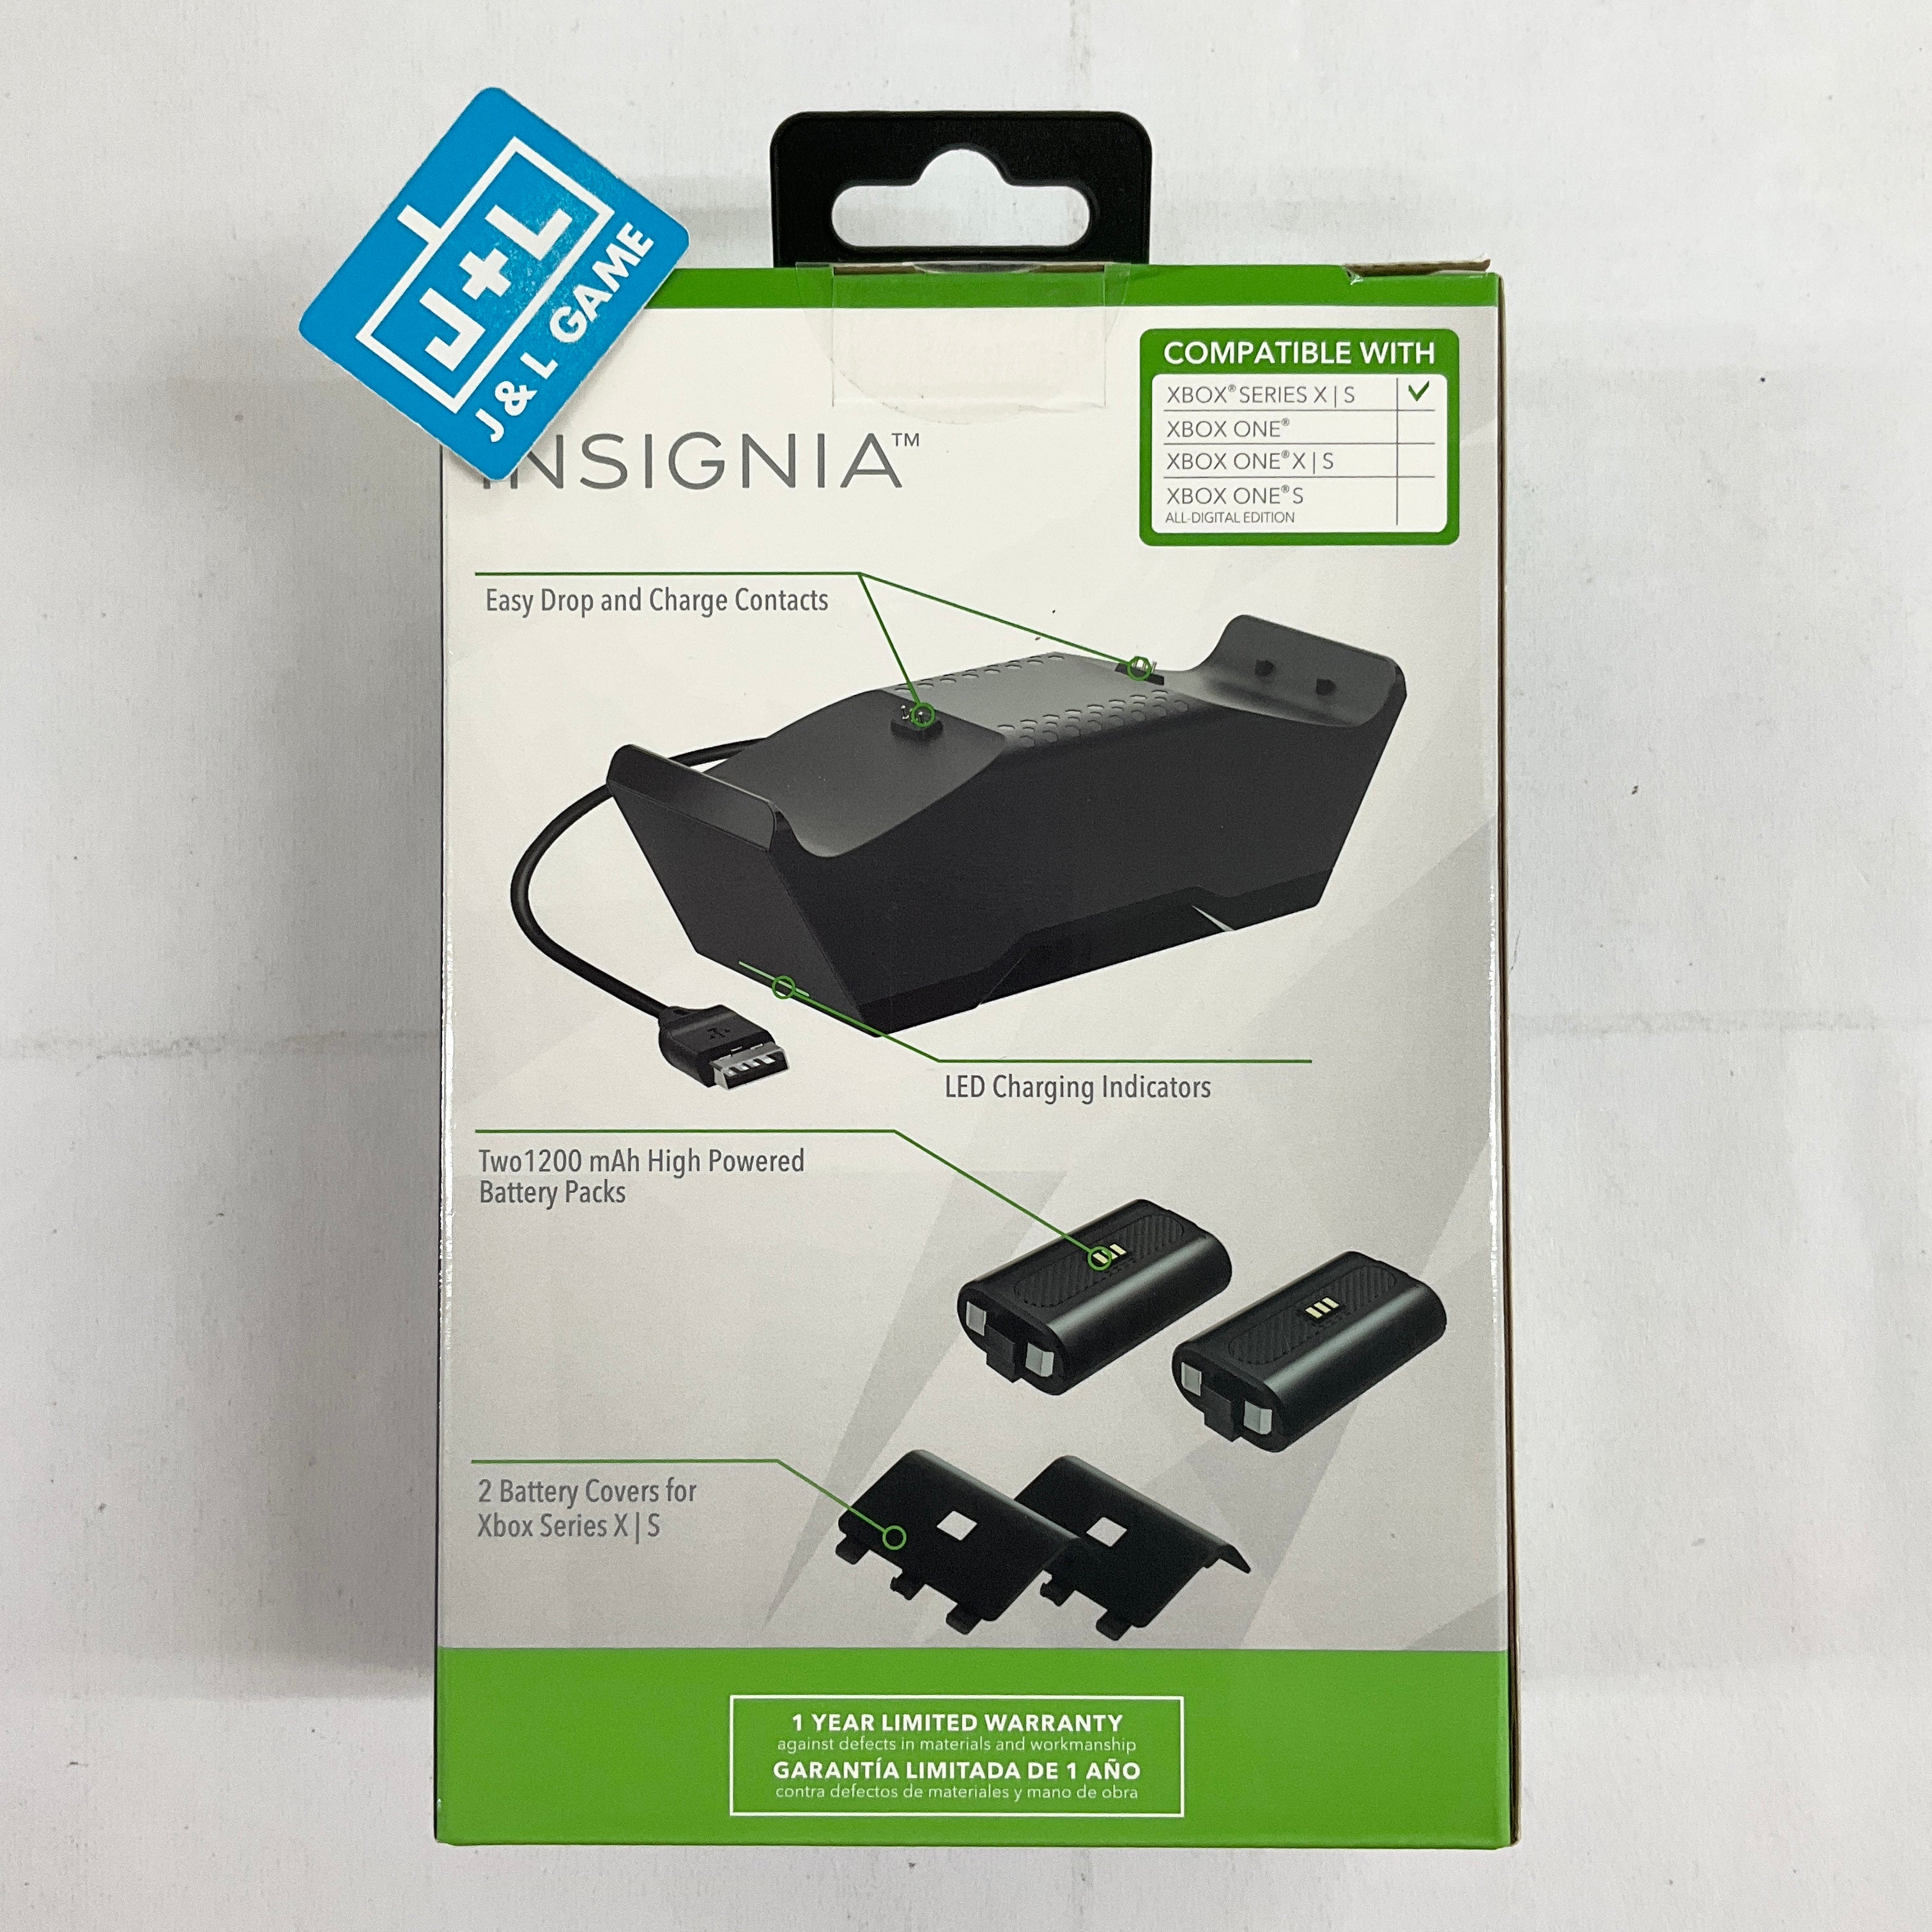 INSIGNIA Dual Controller Charging System for Xbox Series X|S (Black) - (XSX) Xbox Series X Accessories INSIGNIA   